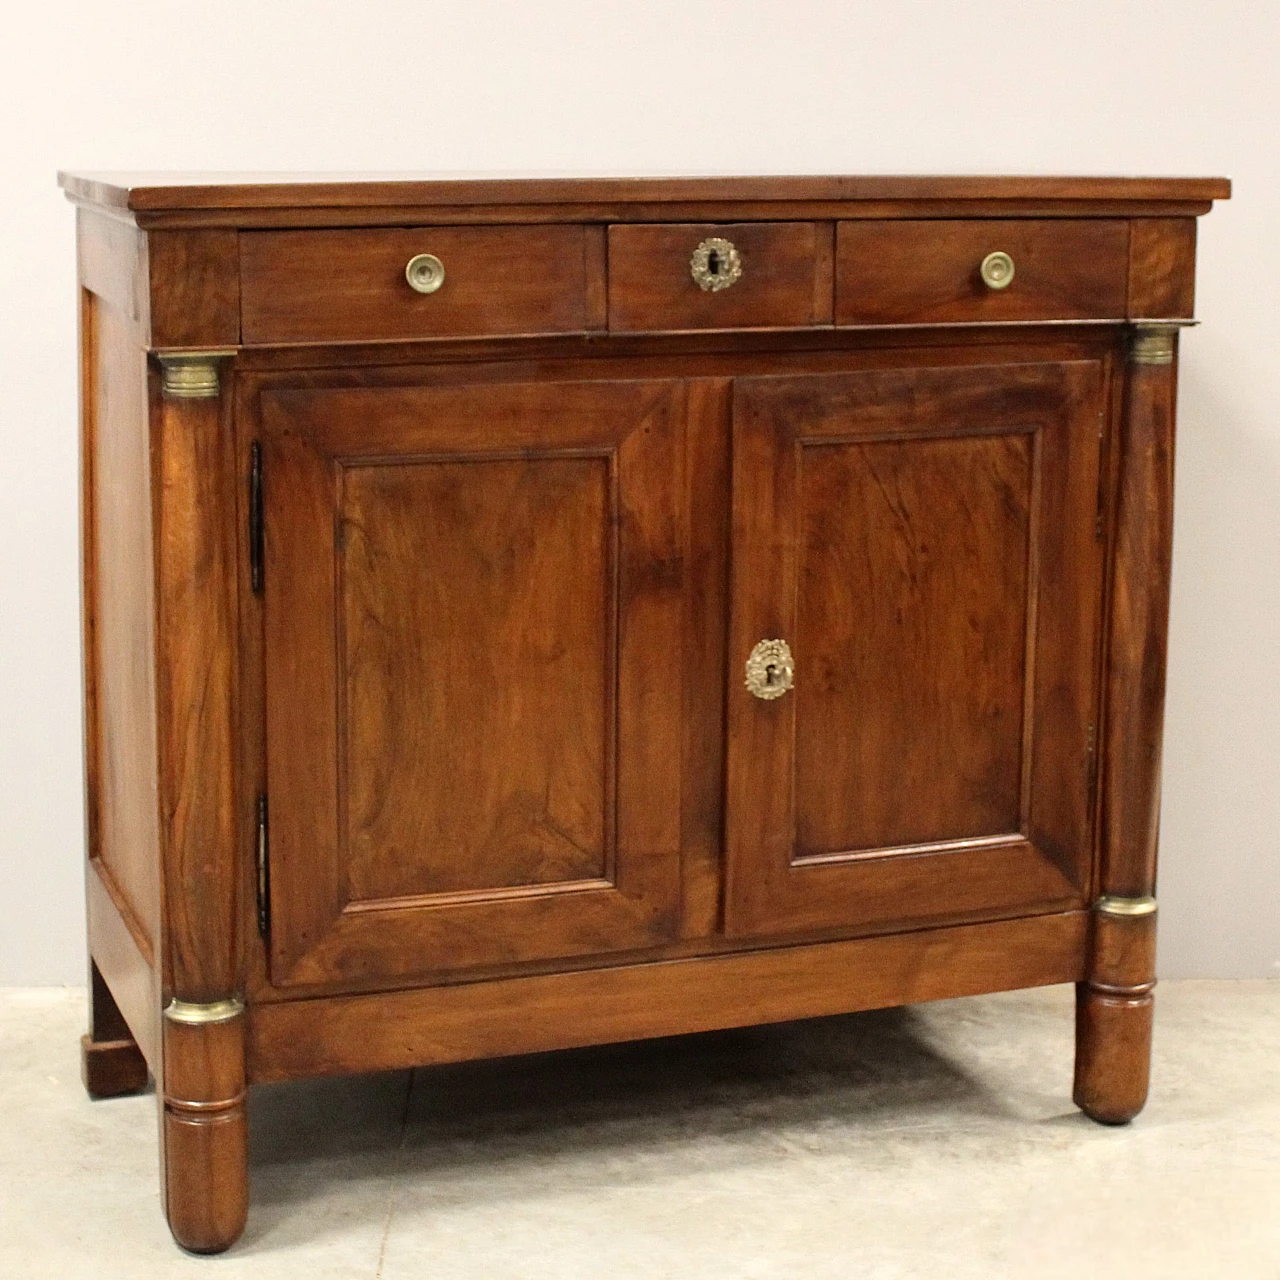 Empire walnut sideboard with doors and drawers, early 19th century 1